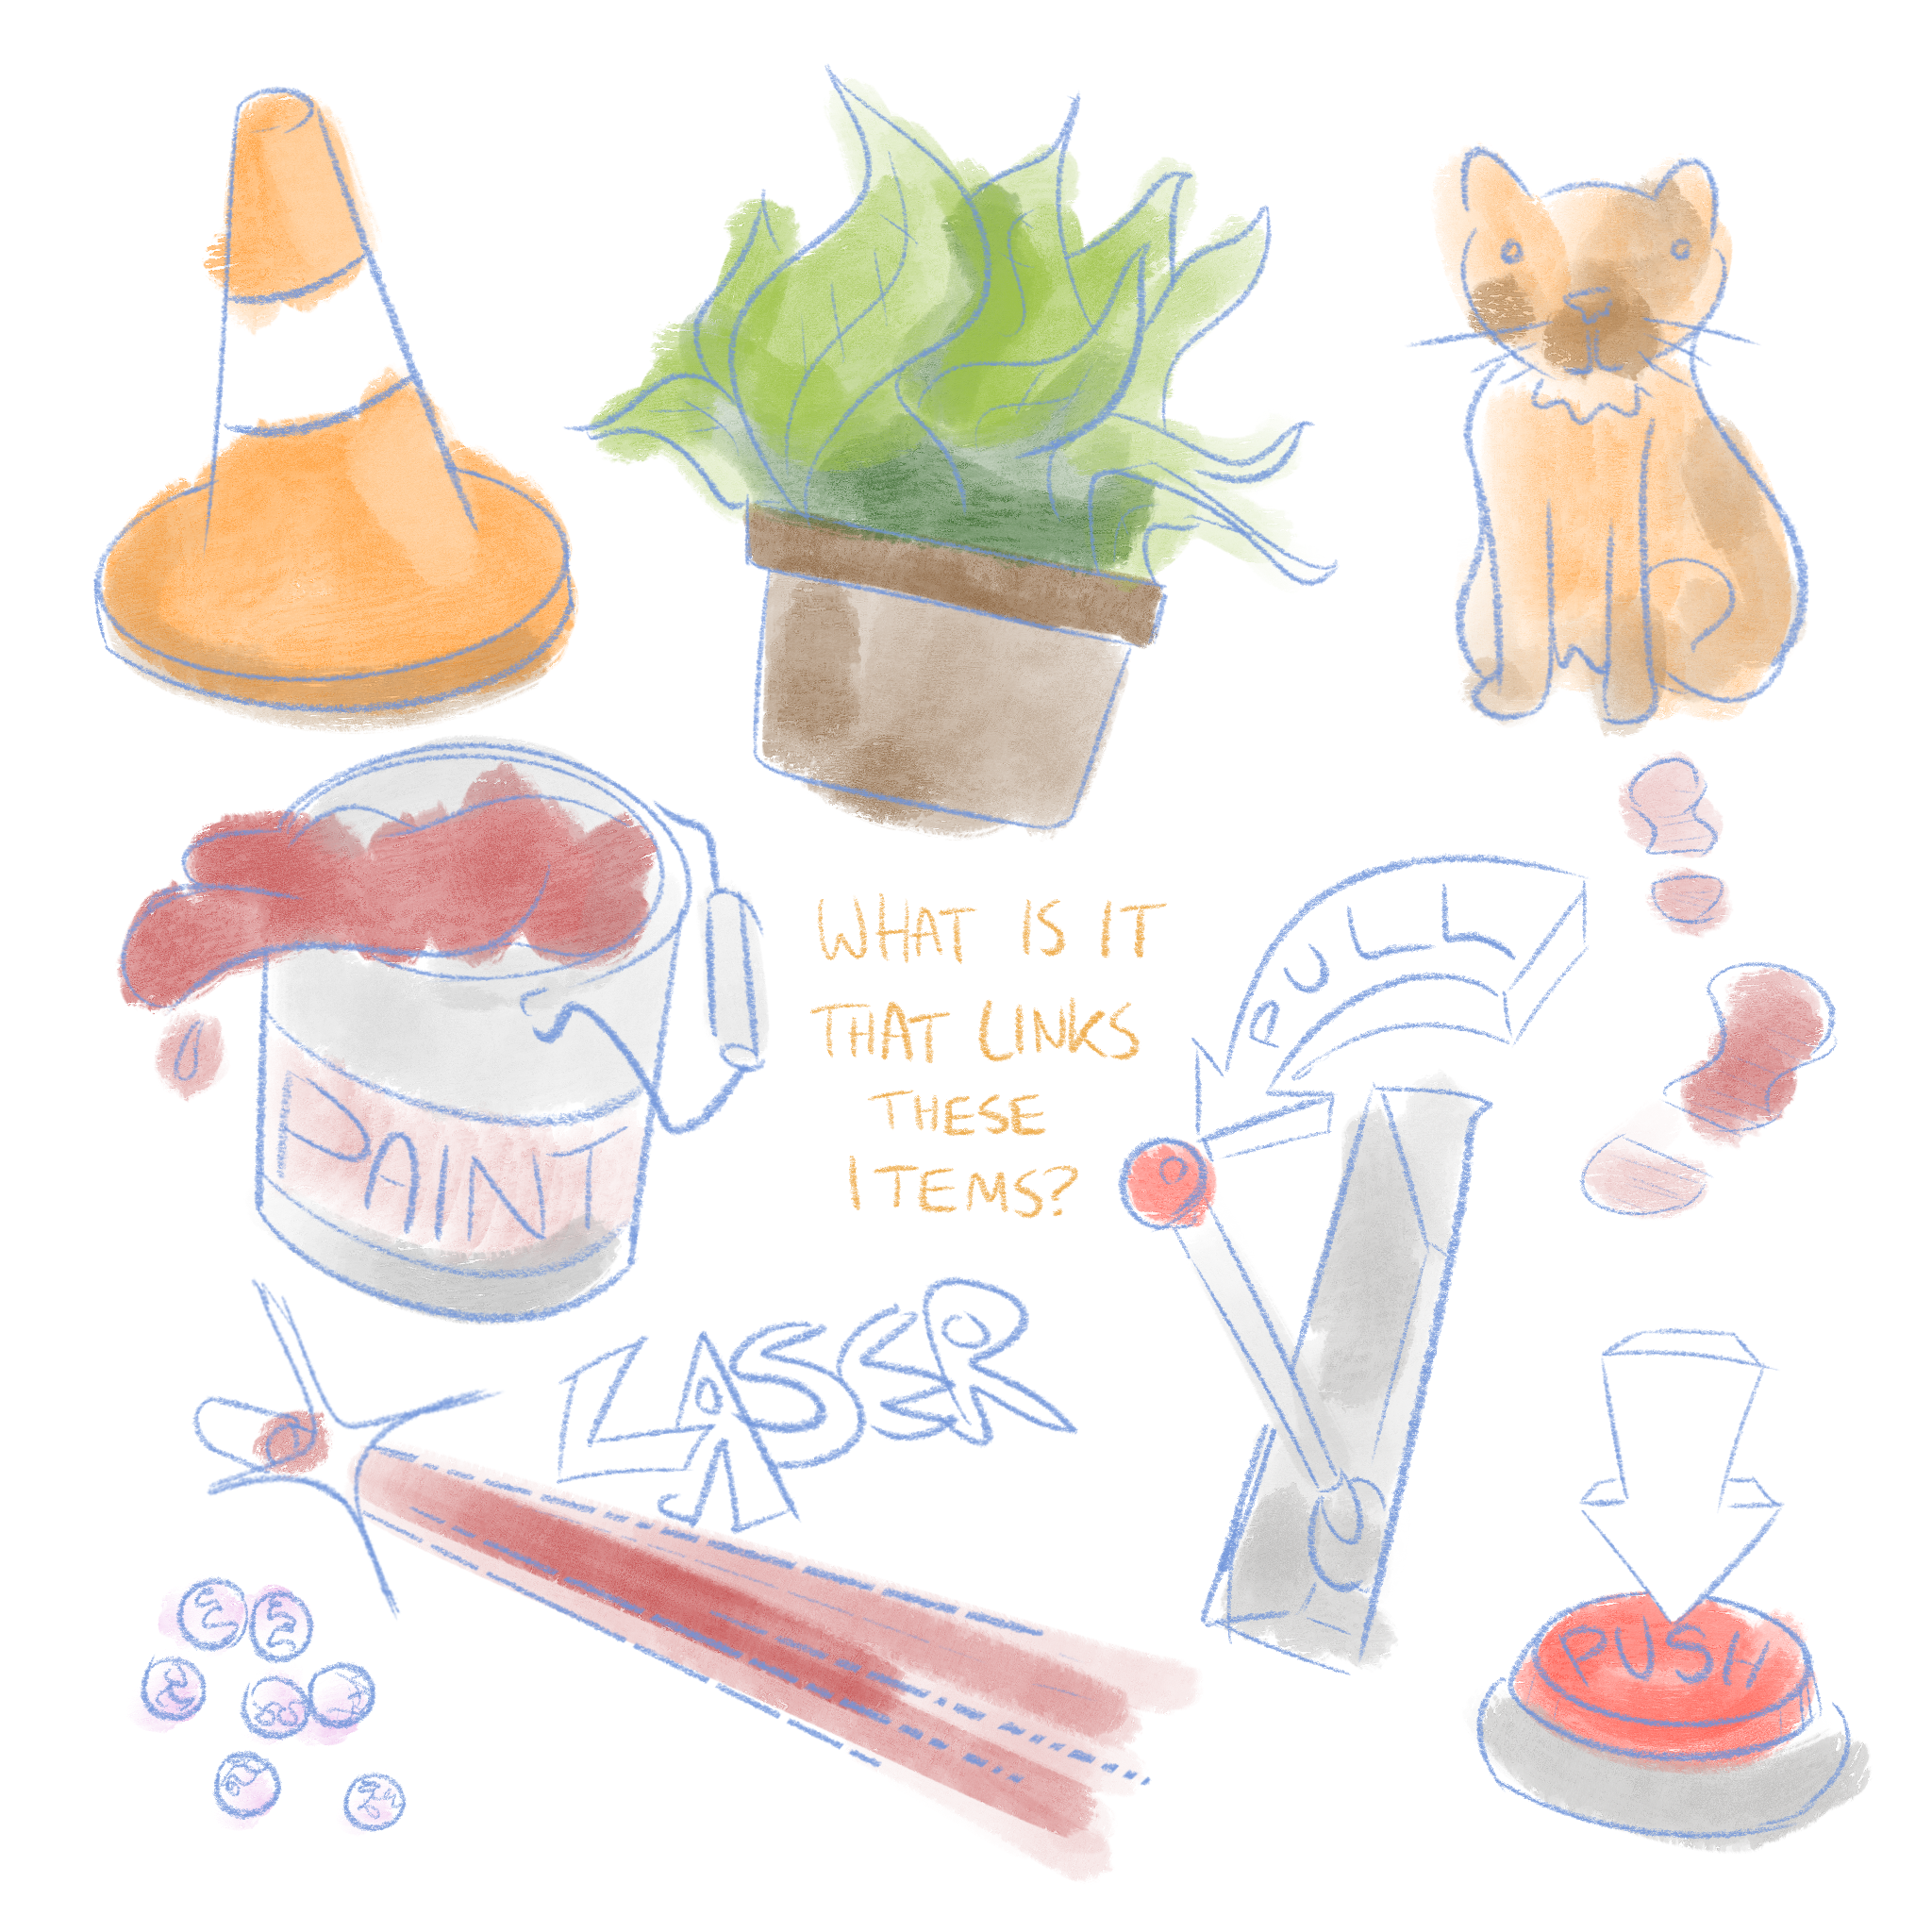 A number of random items that might exist in the game, such as a potted plant, cat, button, lever, traffic cone, marbles and a laser beam